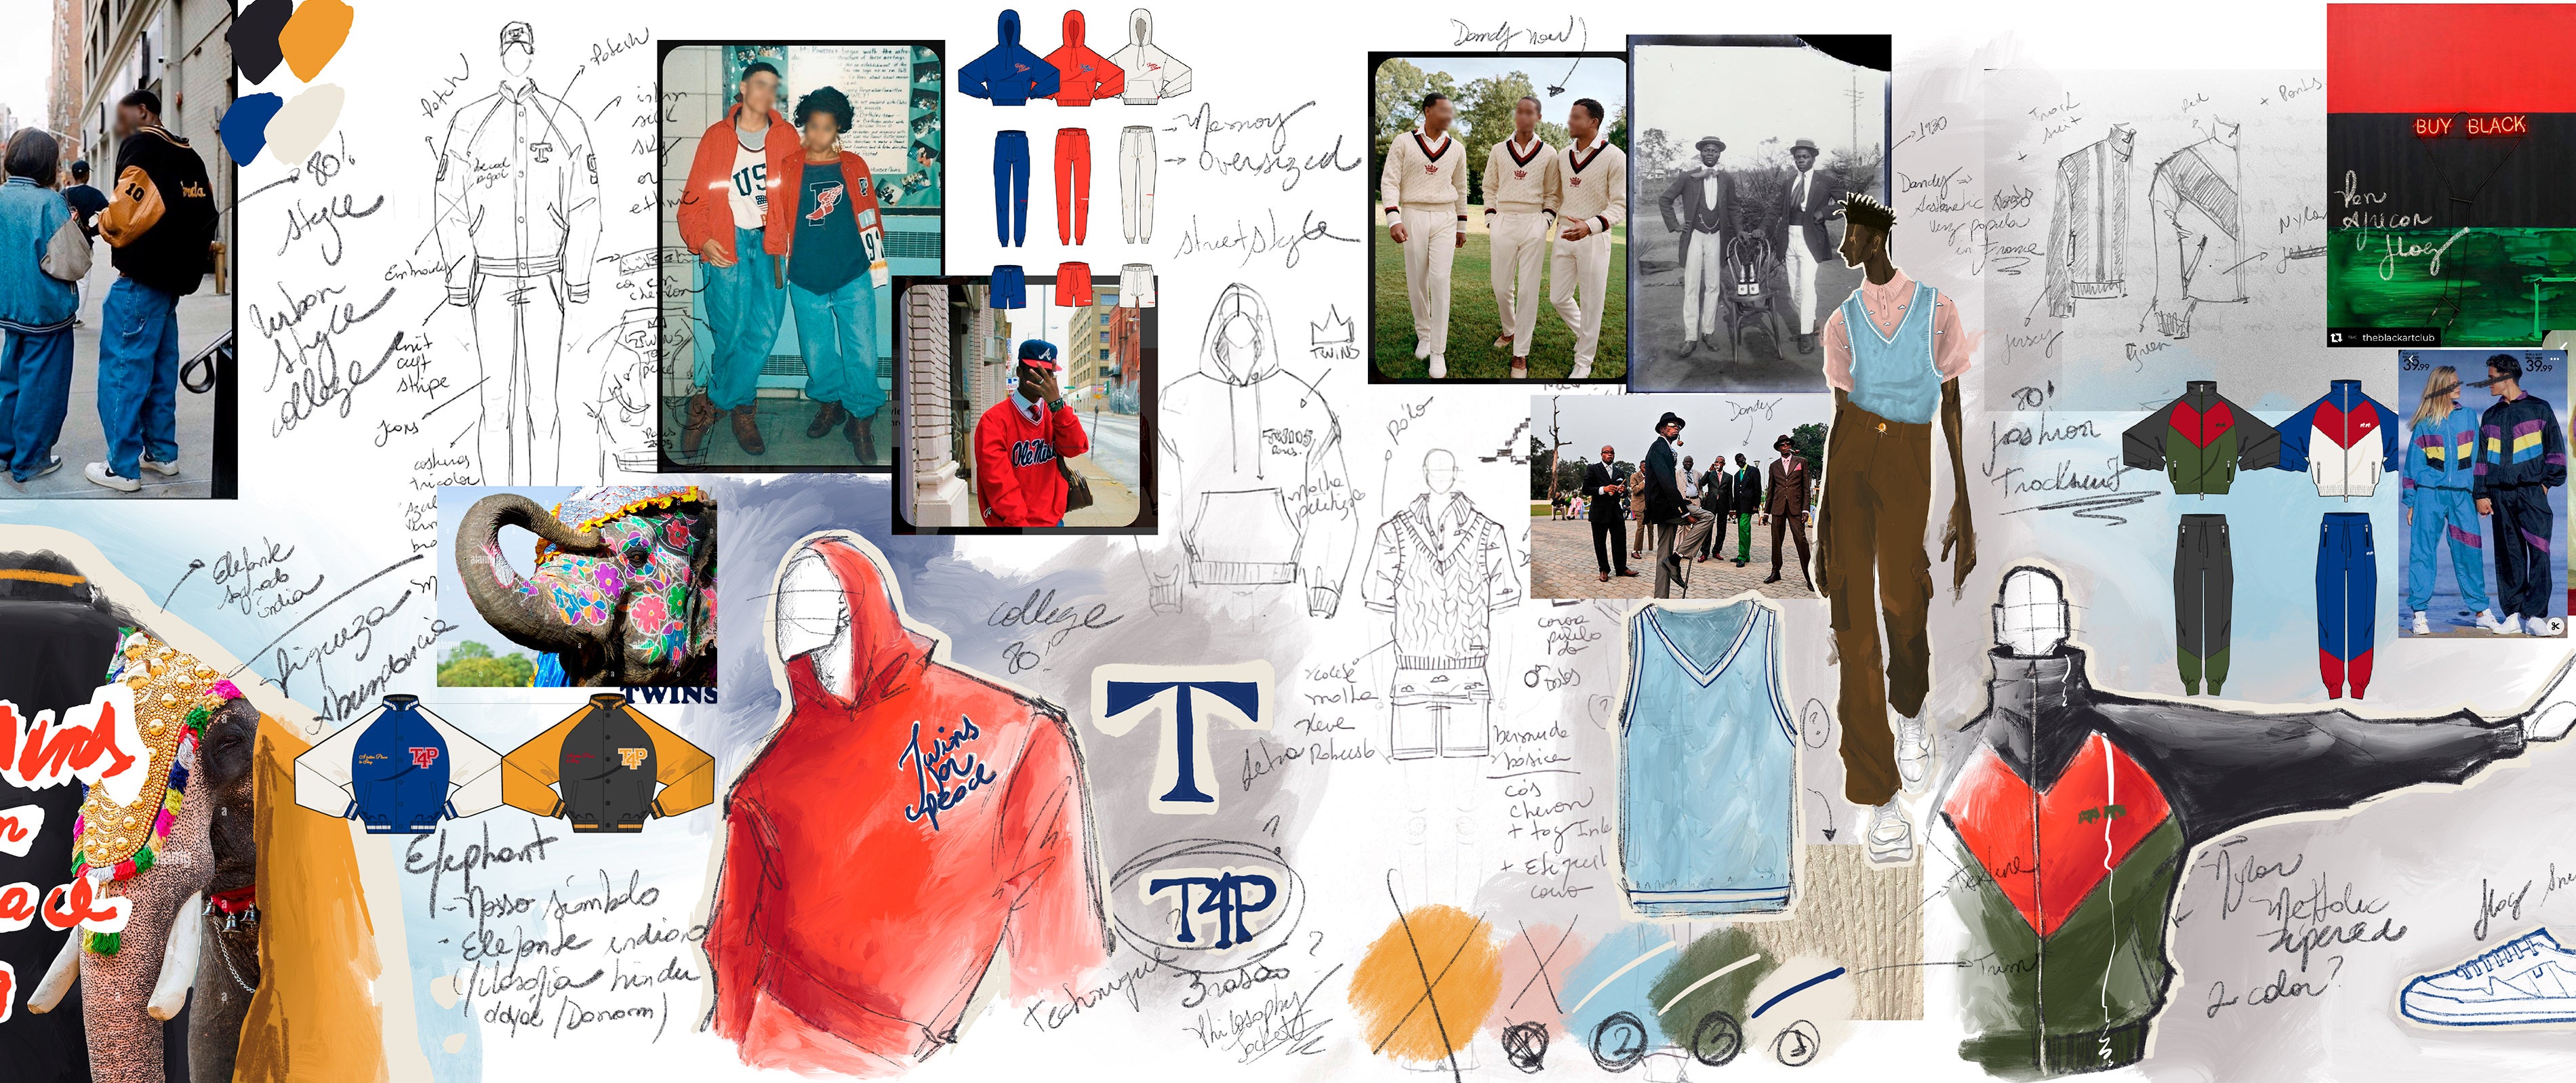 A background image showing sketches and renderings of garments.